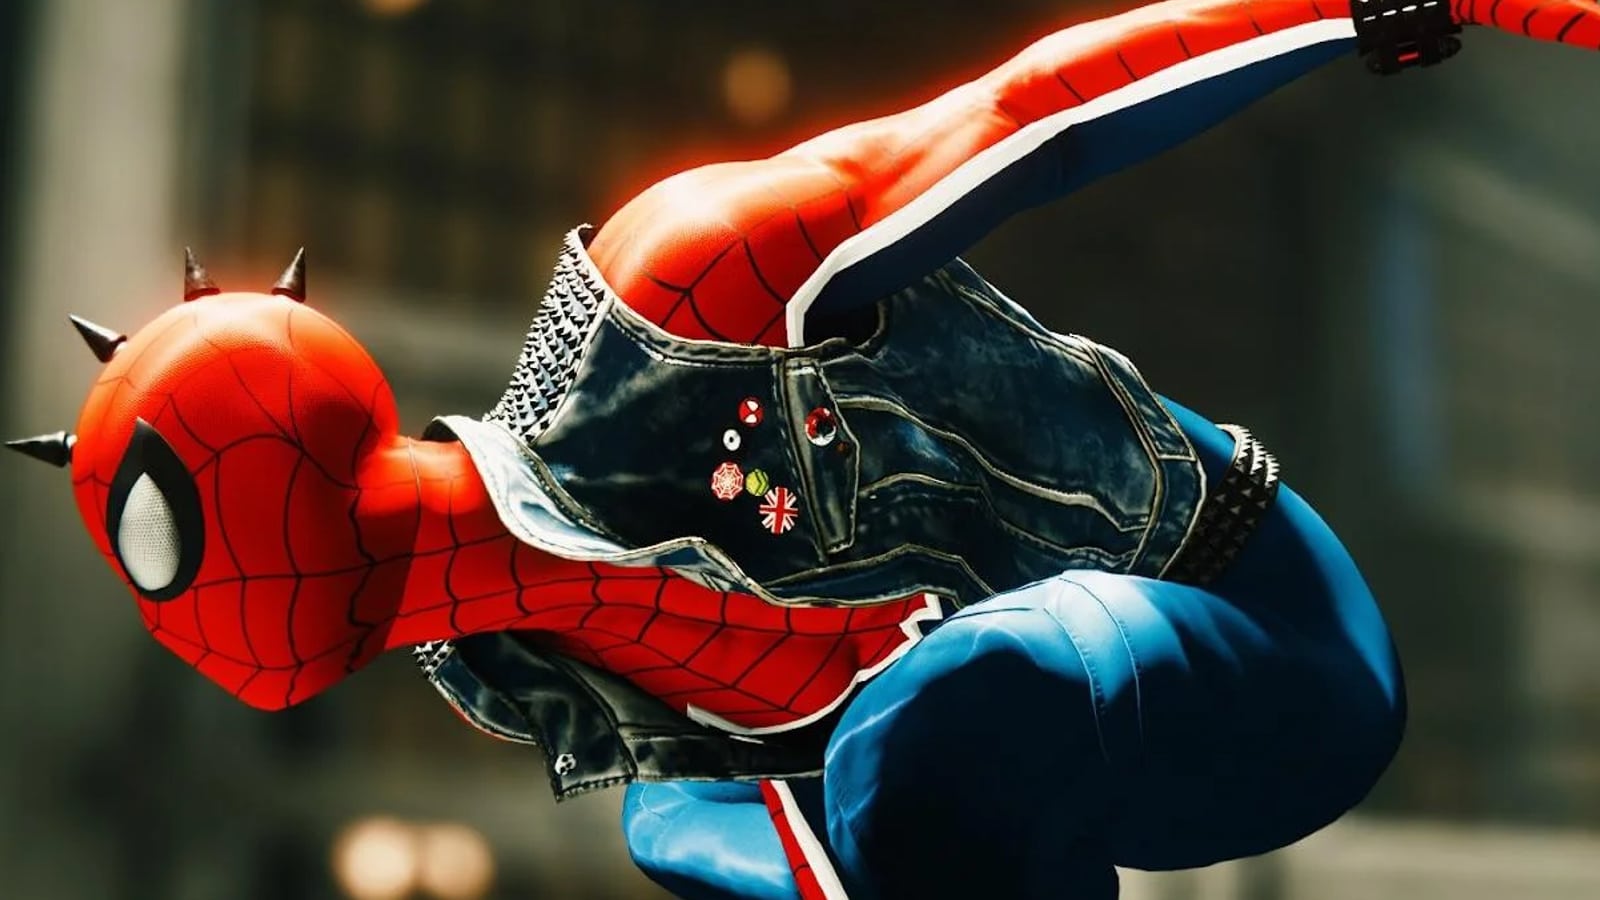 Marvel Fans A New Look At Spider Punk